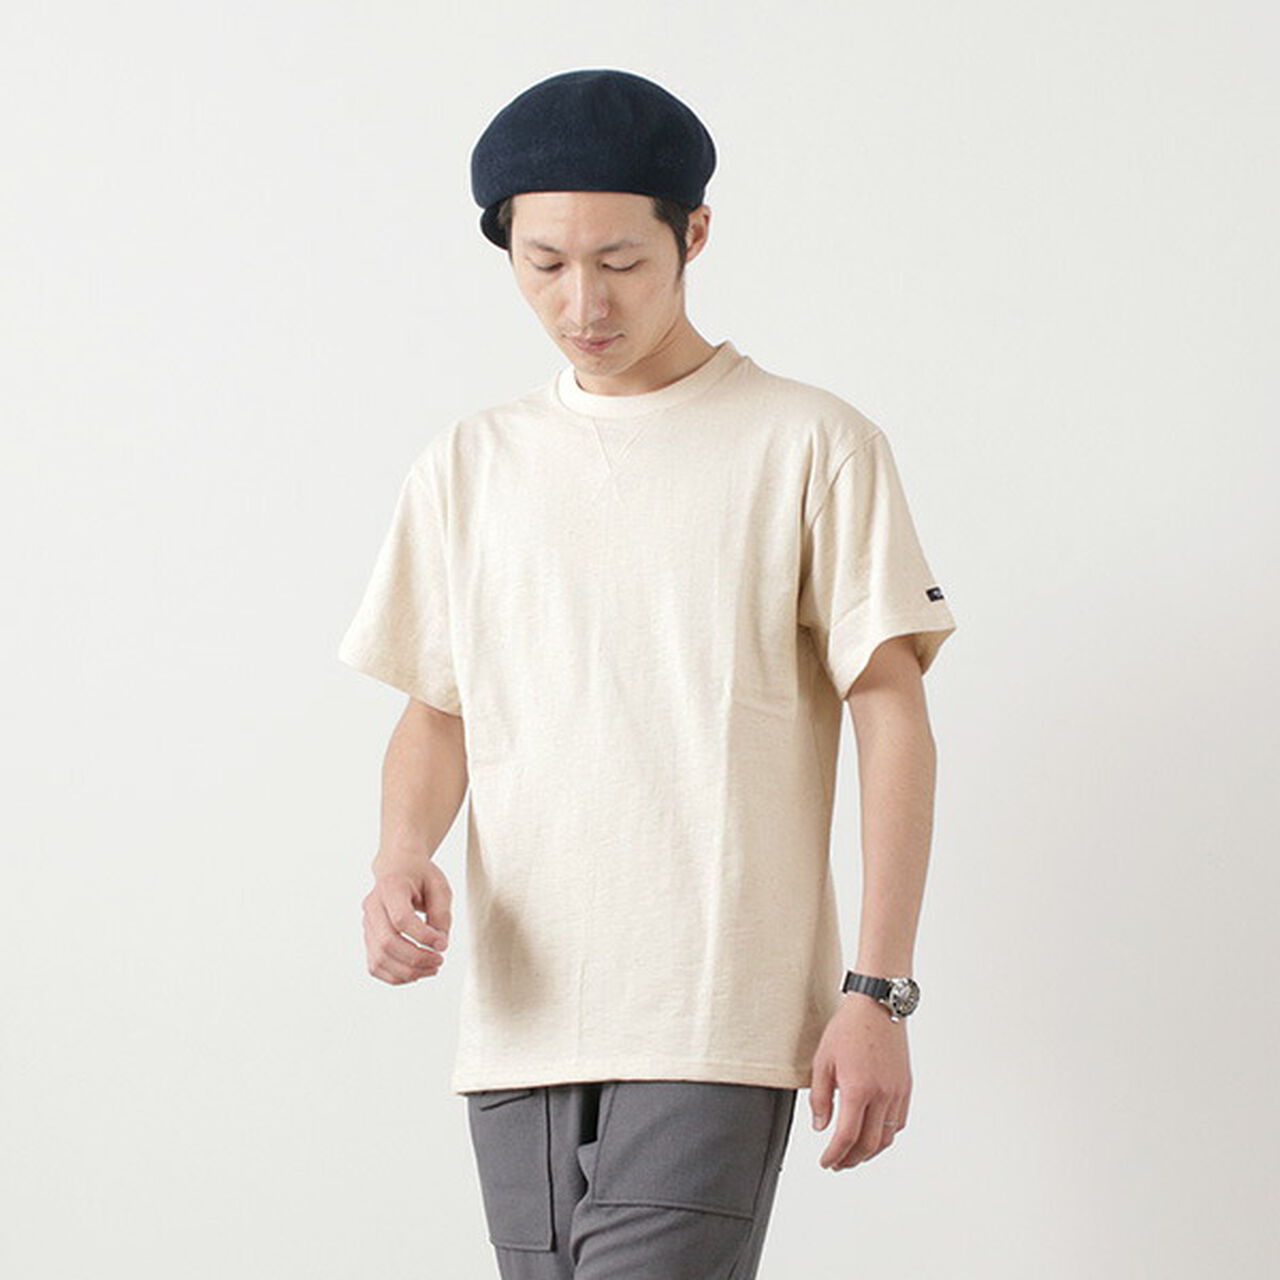 TE001SS HDCS Light Gusseted Crew T-Shirt,Natural, large image number 0